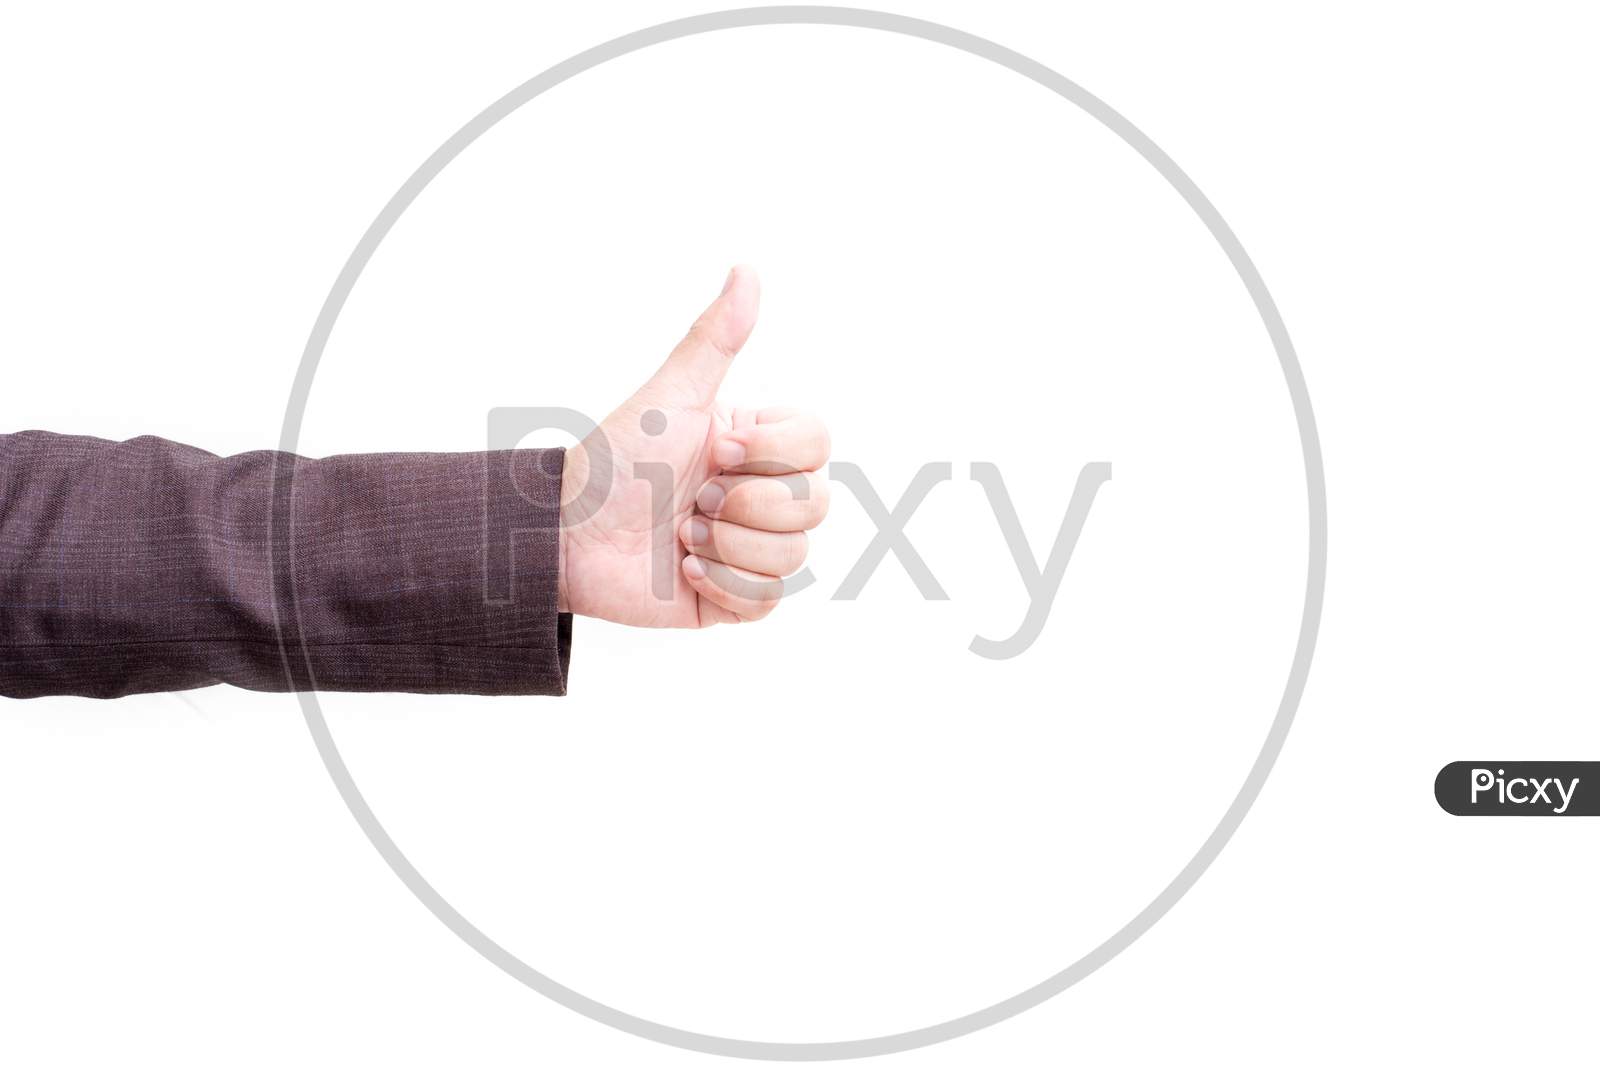 Thumbs Up Hand Sign On White Isolated Background. Cheerful And Success Of Business Concept. Finger Of People Hand